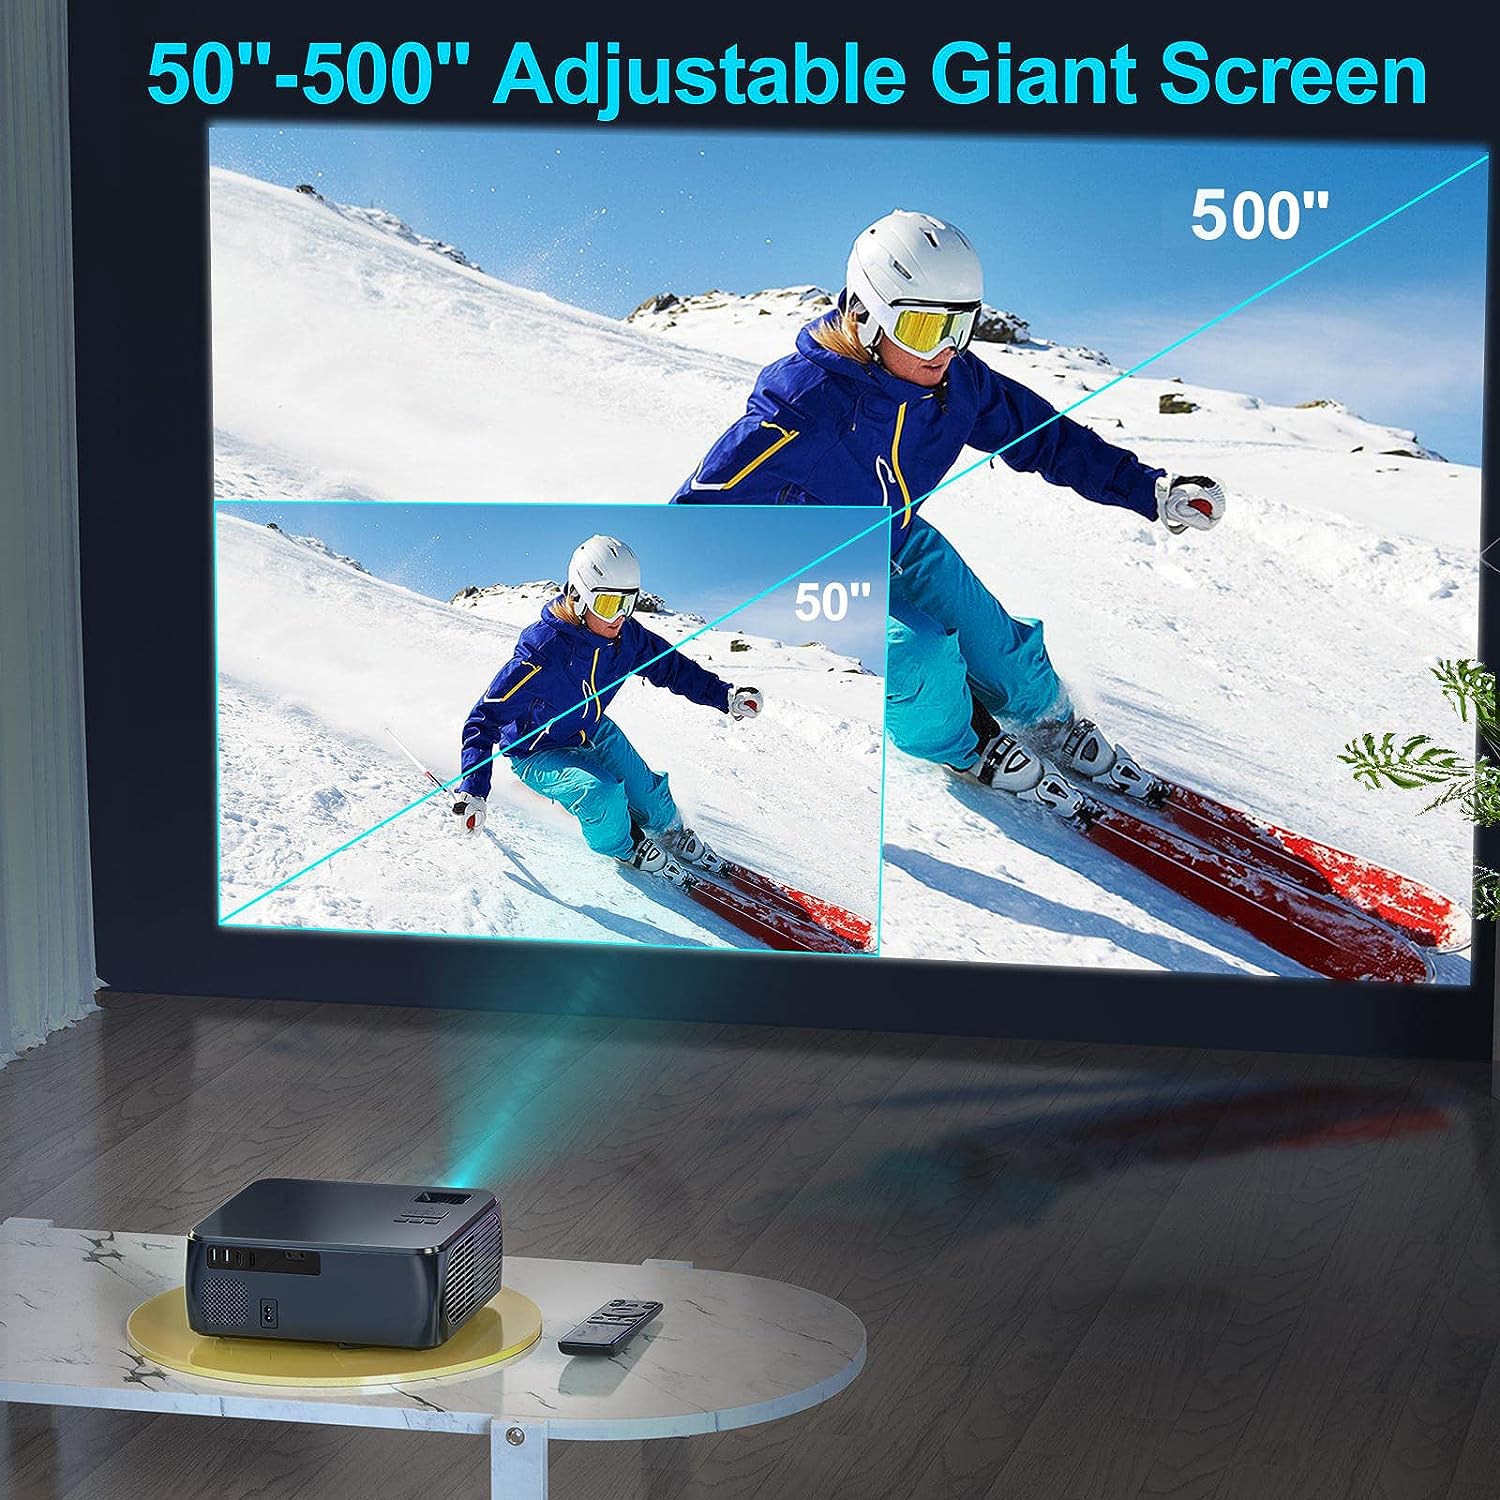 Native 1080P Projector Support 4K Full HD, WiMiUS S1 Top Bright